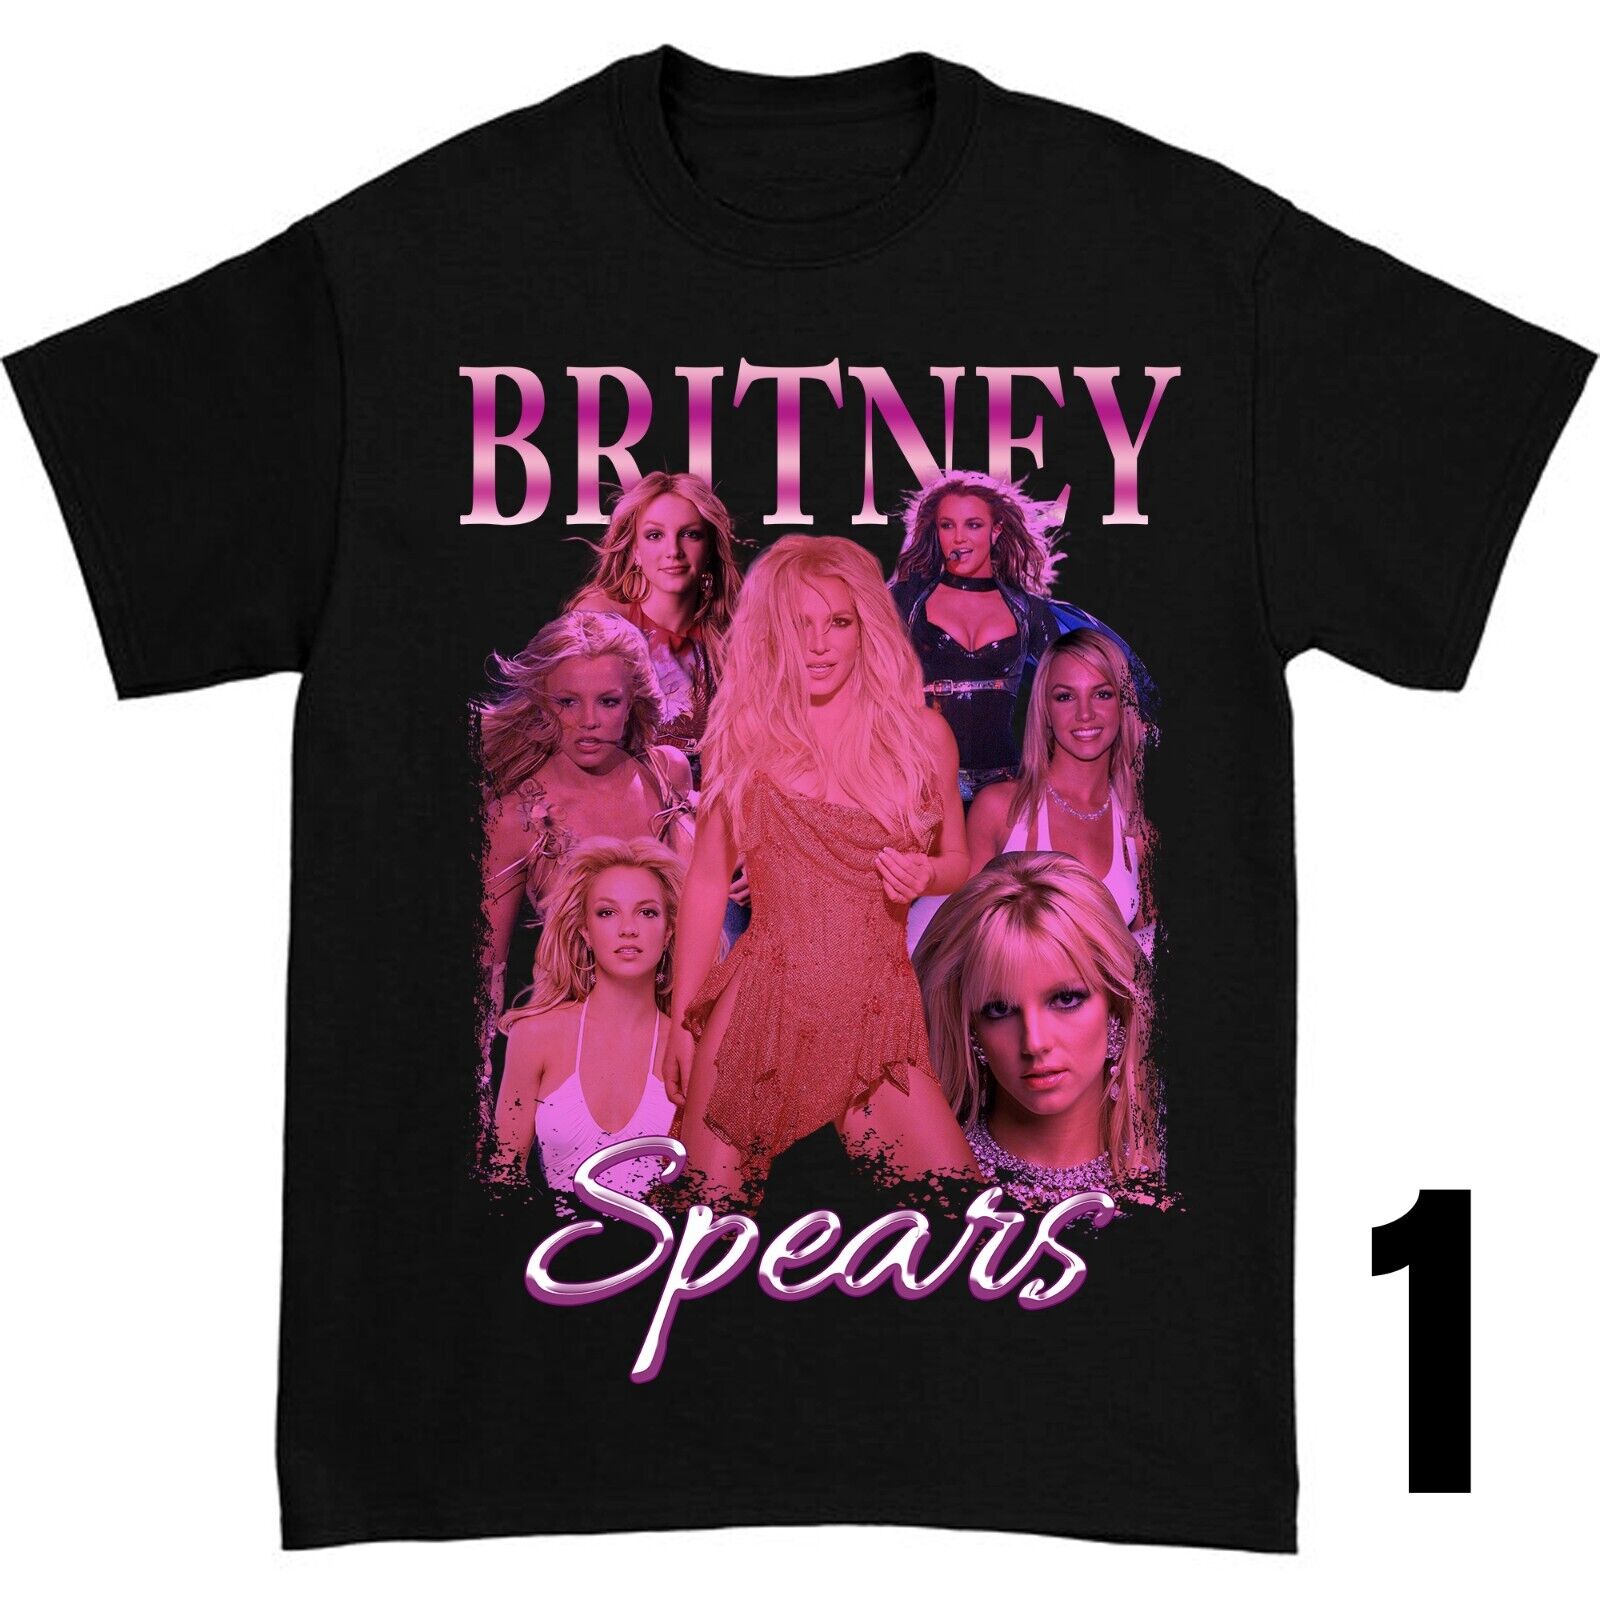 HOT Trend Britney Spears Gift For Family Unisex All-Size Shirt SELLING FAST